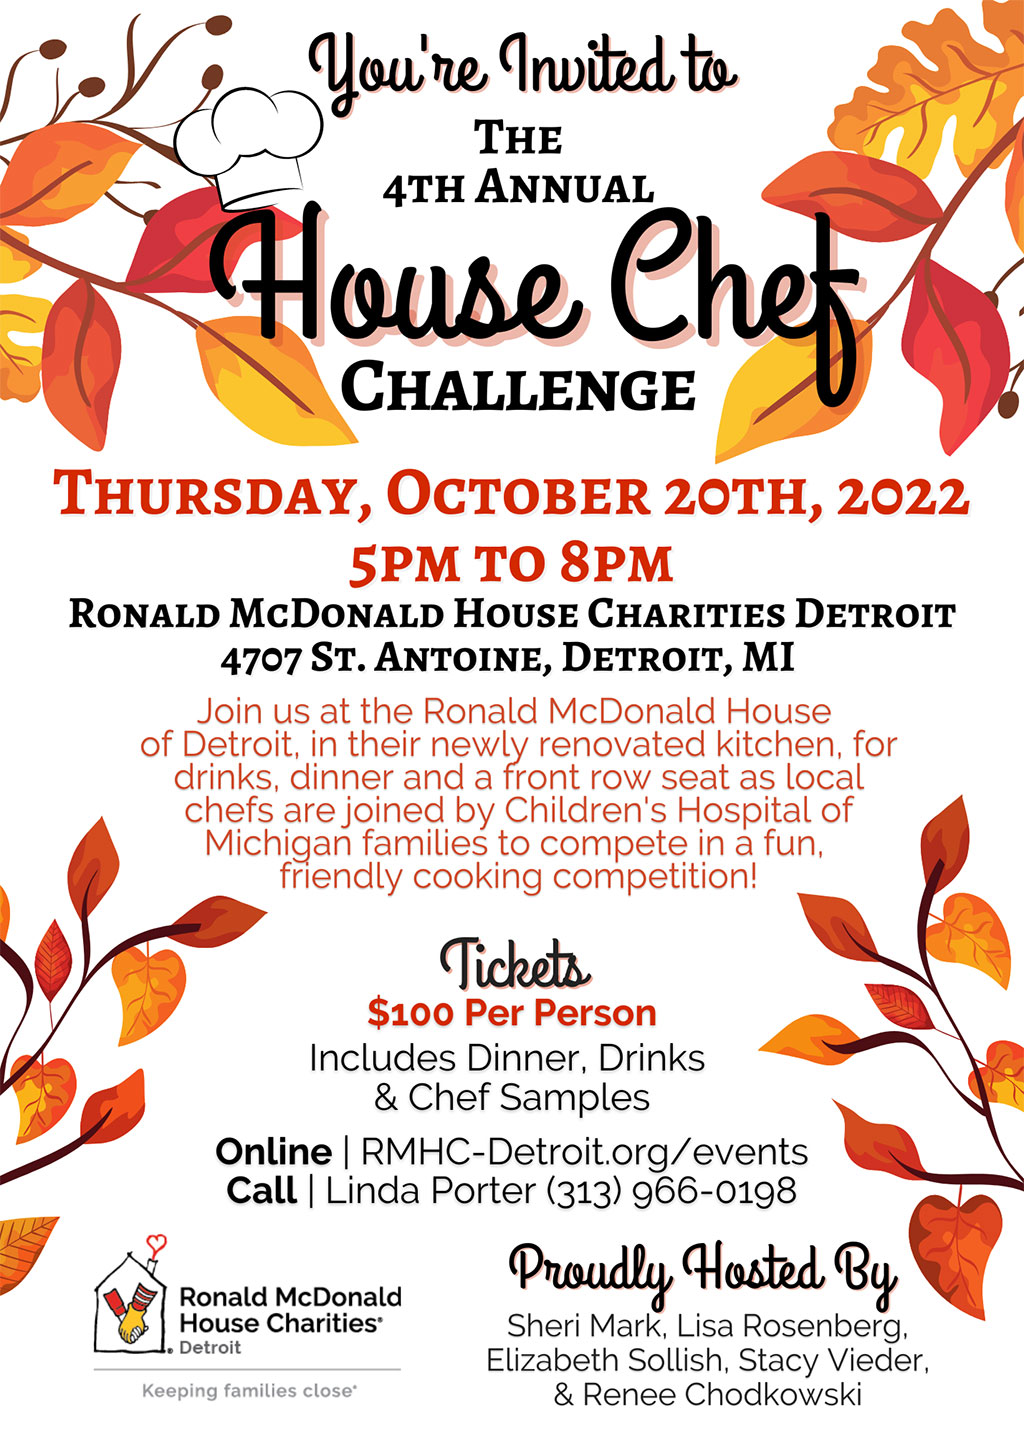 RMHC 4th annual House Chef Challenge Image